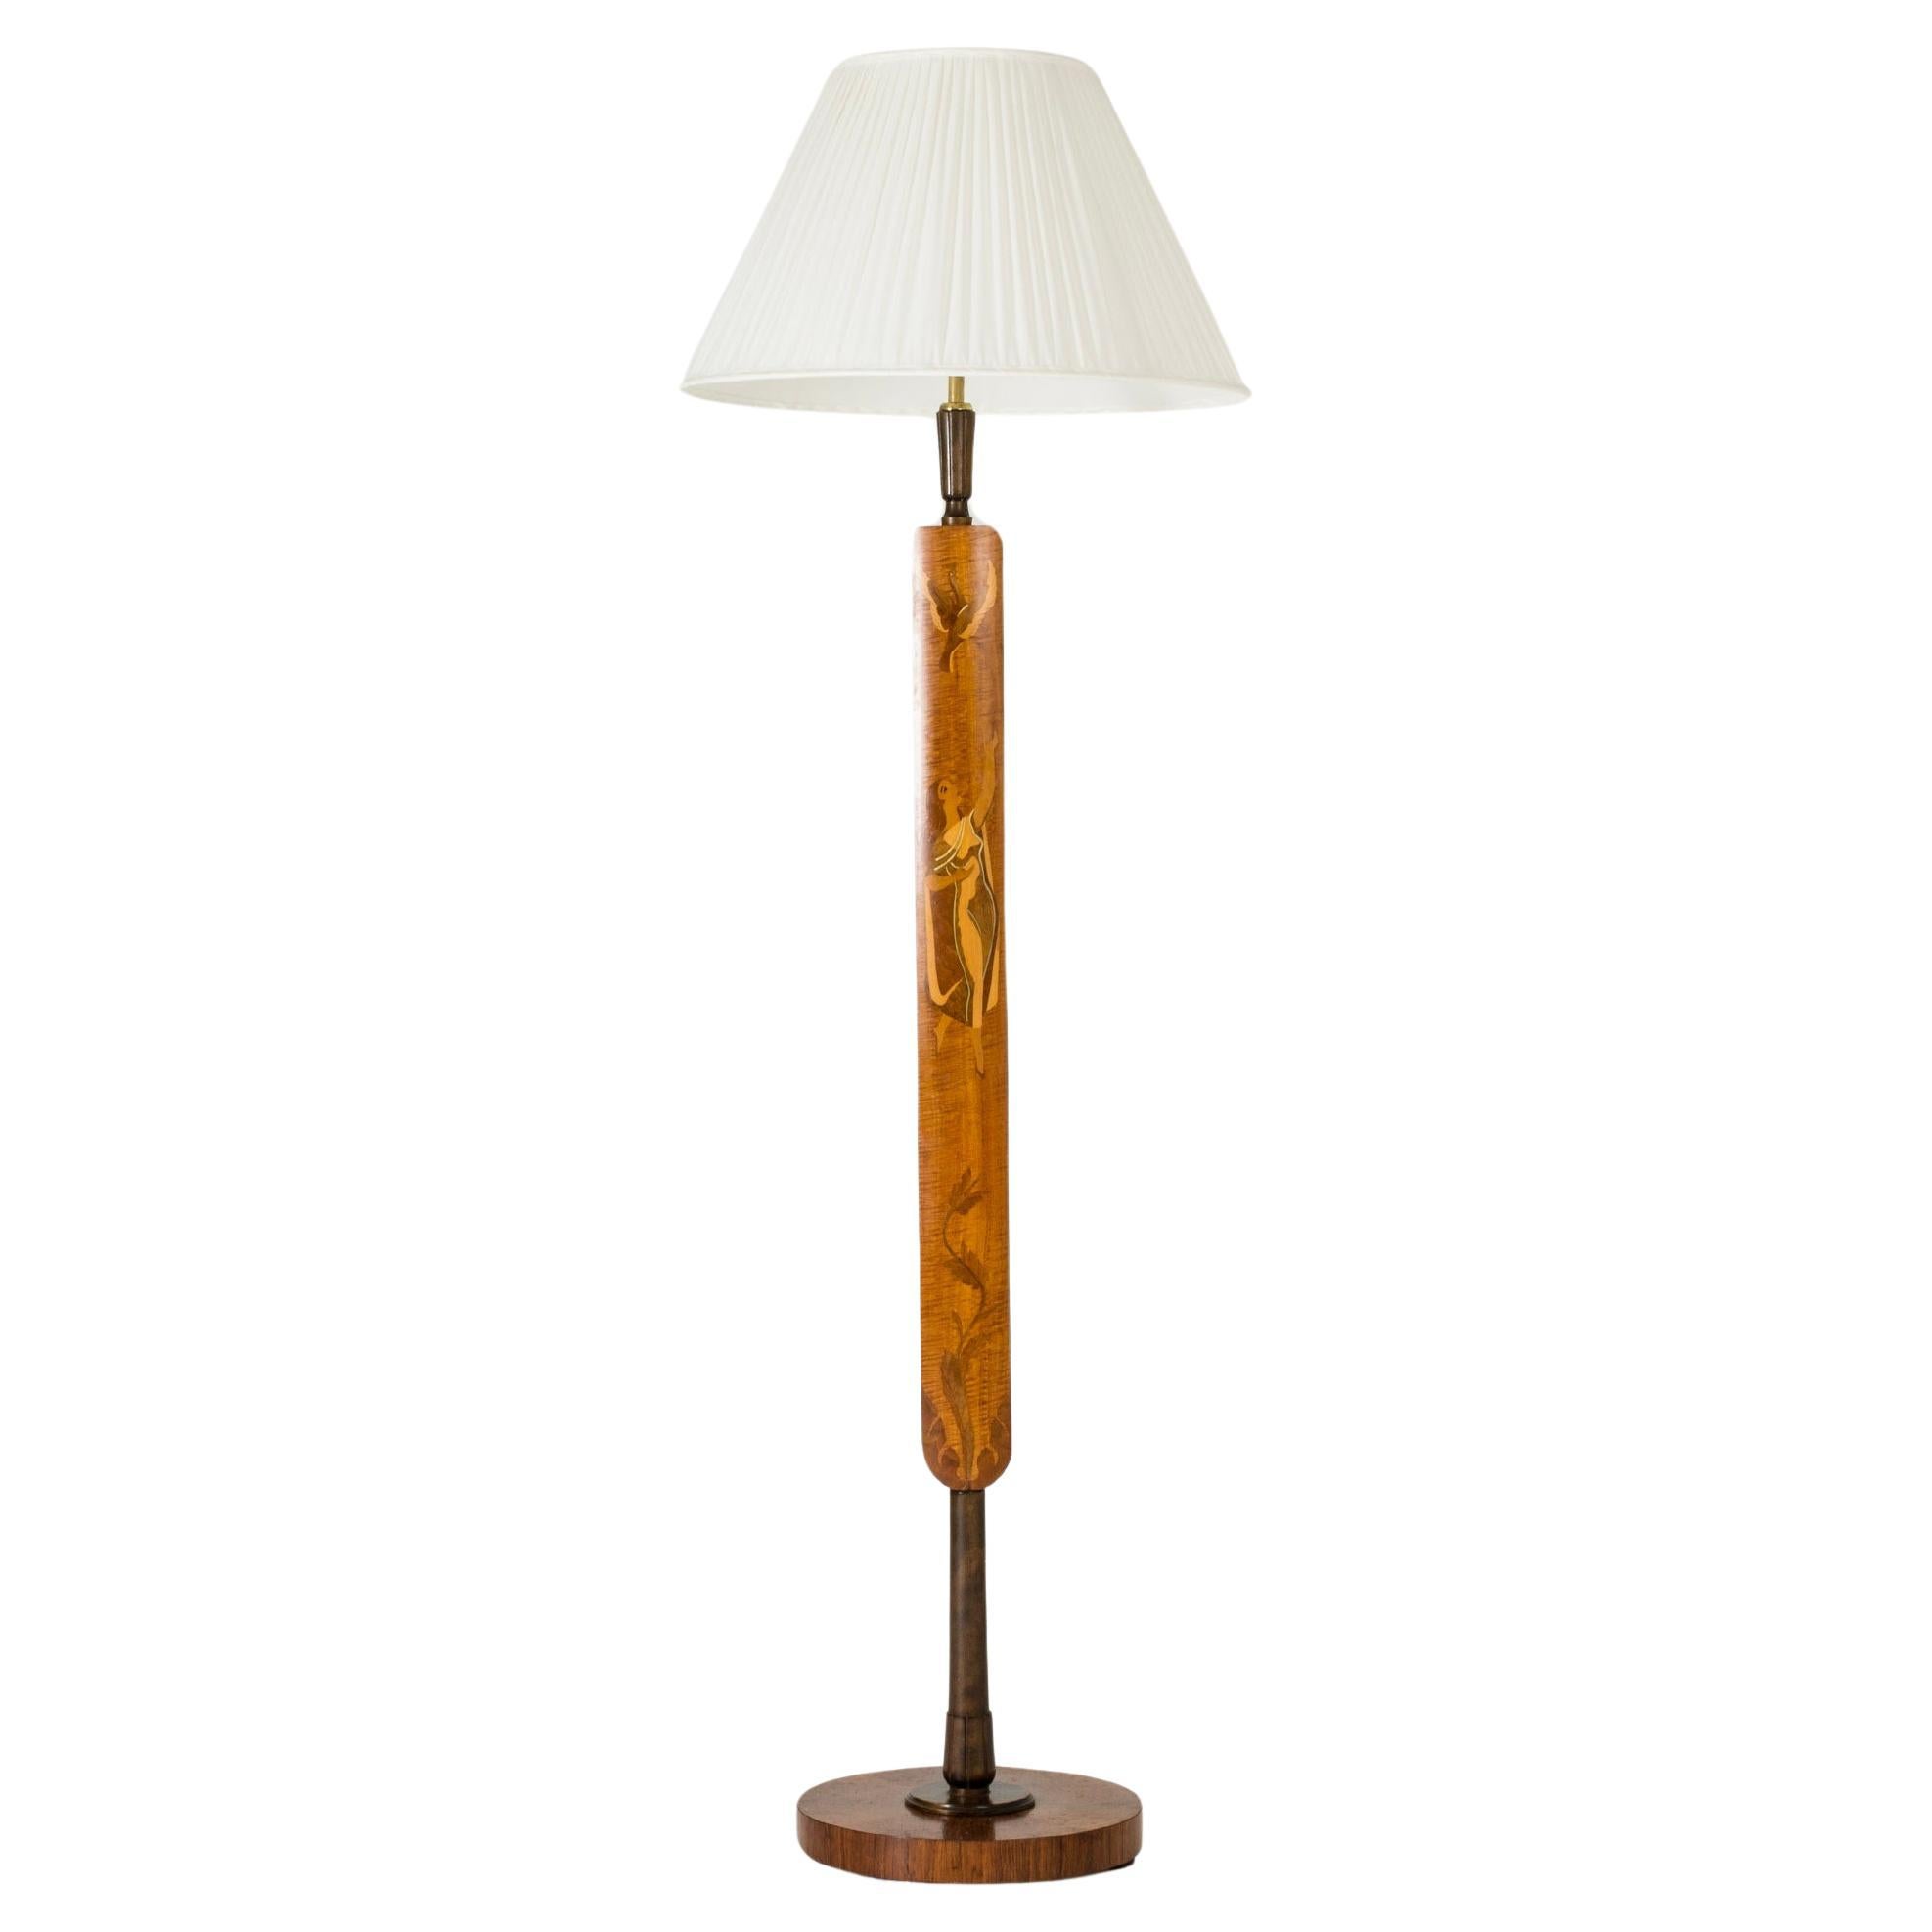 Swedish Modern floor lamp with inlays, Mjölby Intarsia, Sweden, 1930s For Sale